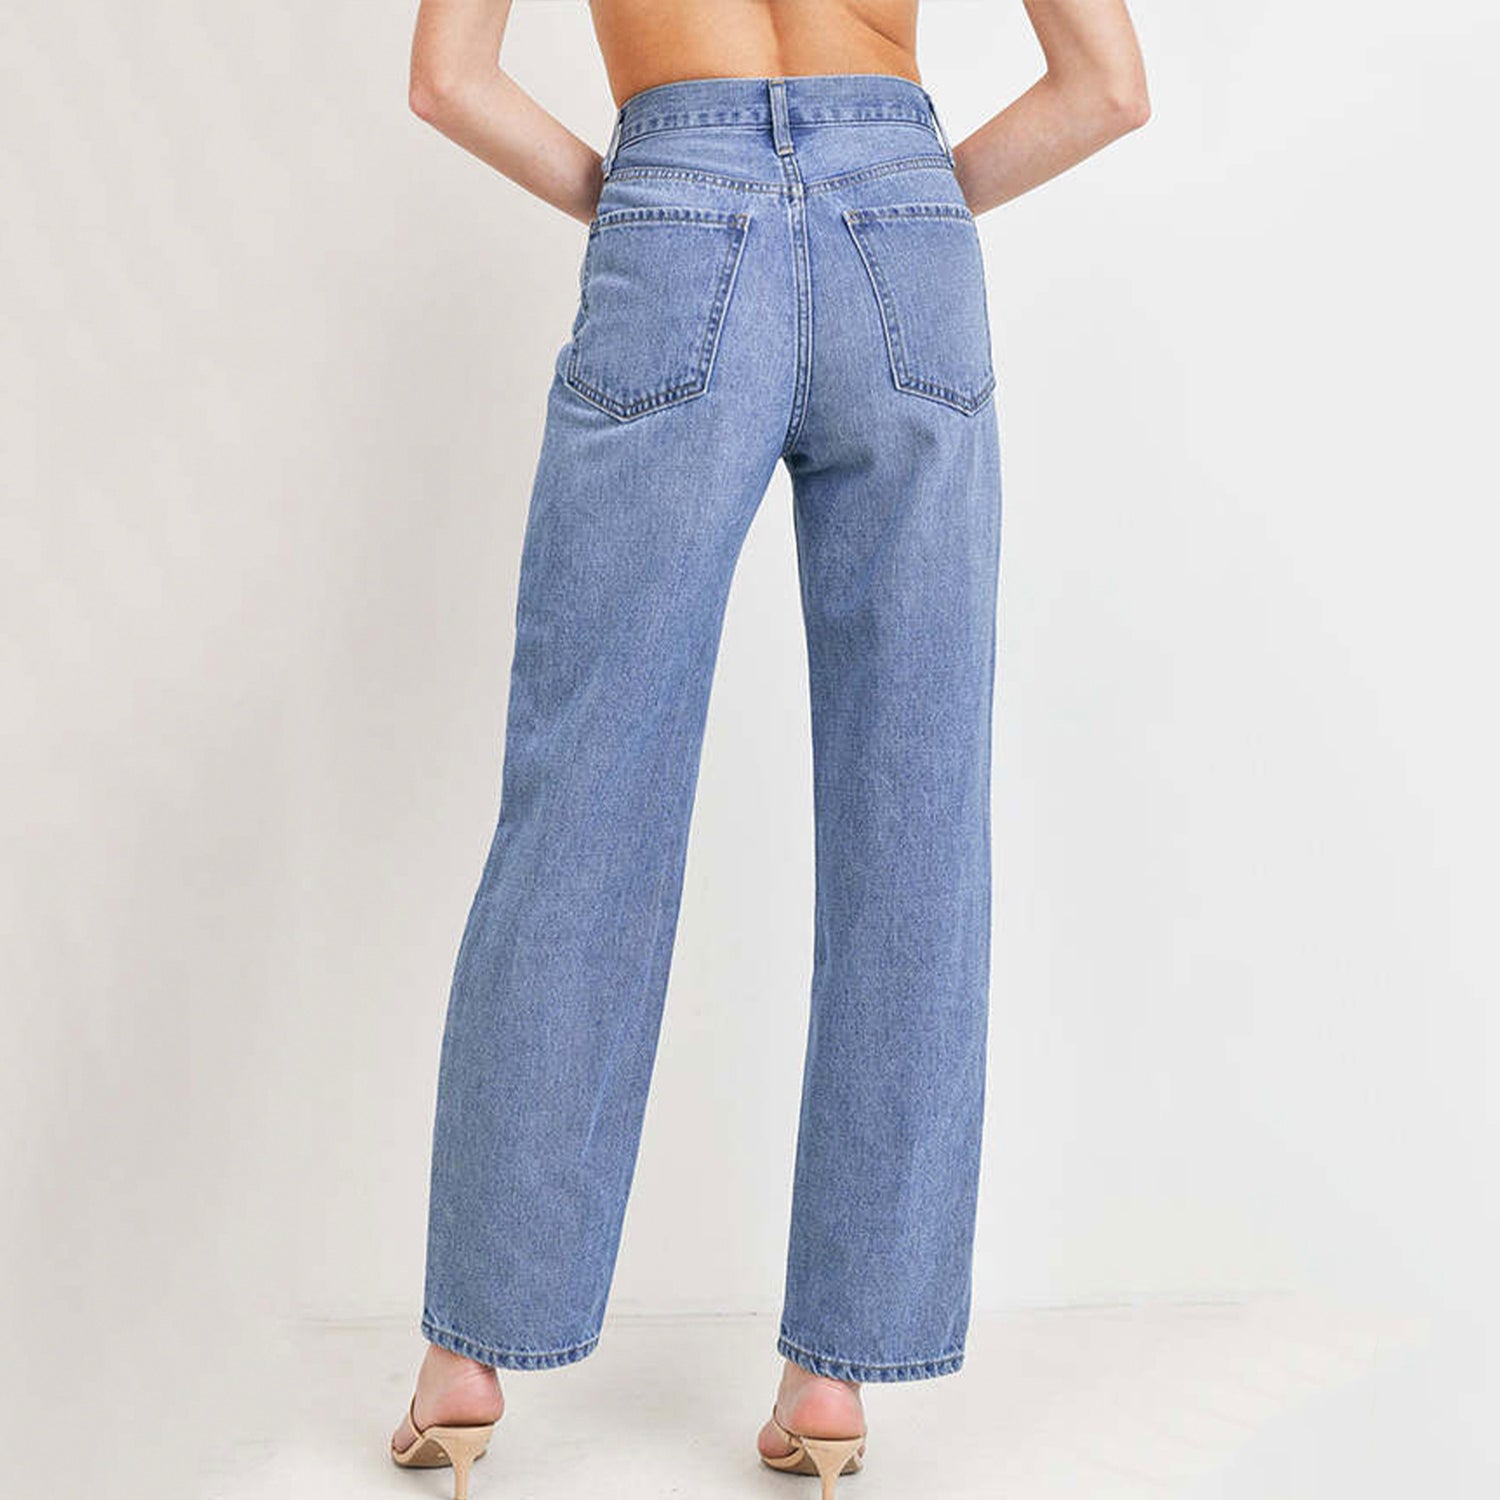 Just Black Denim High Rise Criss Cross Straight Jean. This is the jean of the season! These fun jeans have a criss cross fly, high waist, and straight leg with a cropped hem